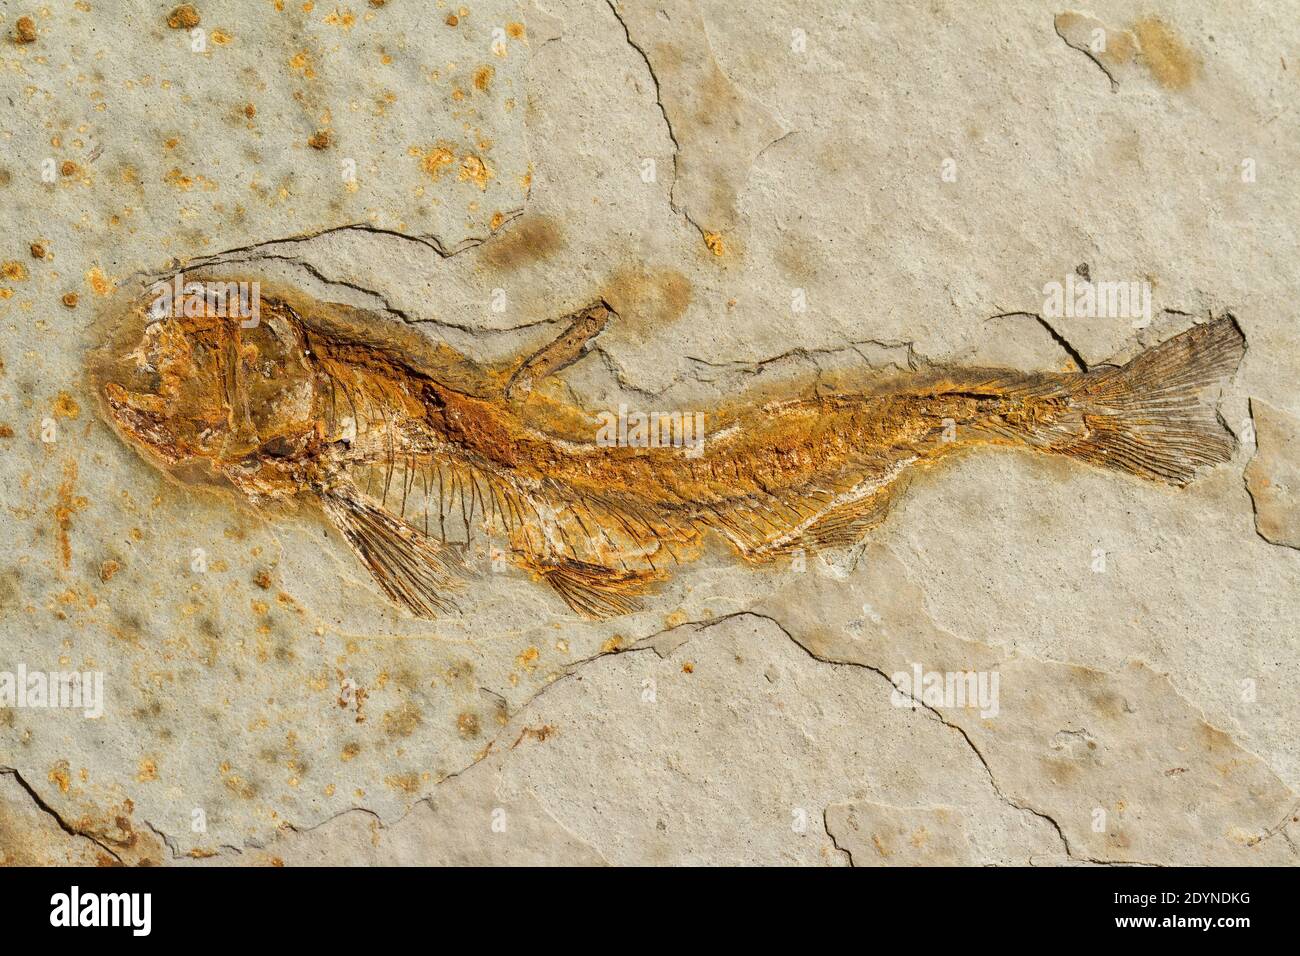 Lycoptera sp., a fossil fish from Liaoning, China, dating back to the Lower Cretaceous Period (110 million years ago) Stock Photo